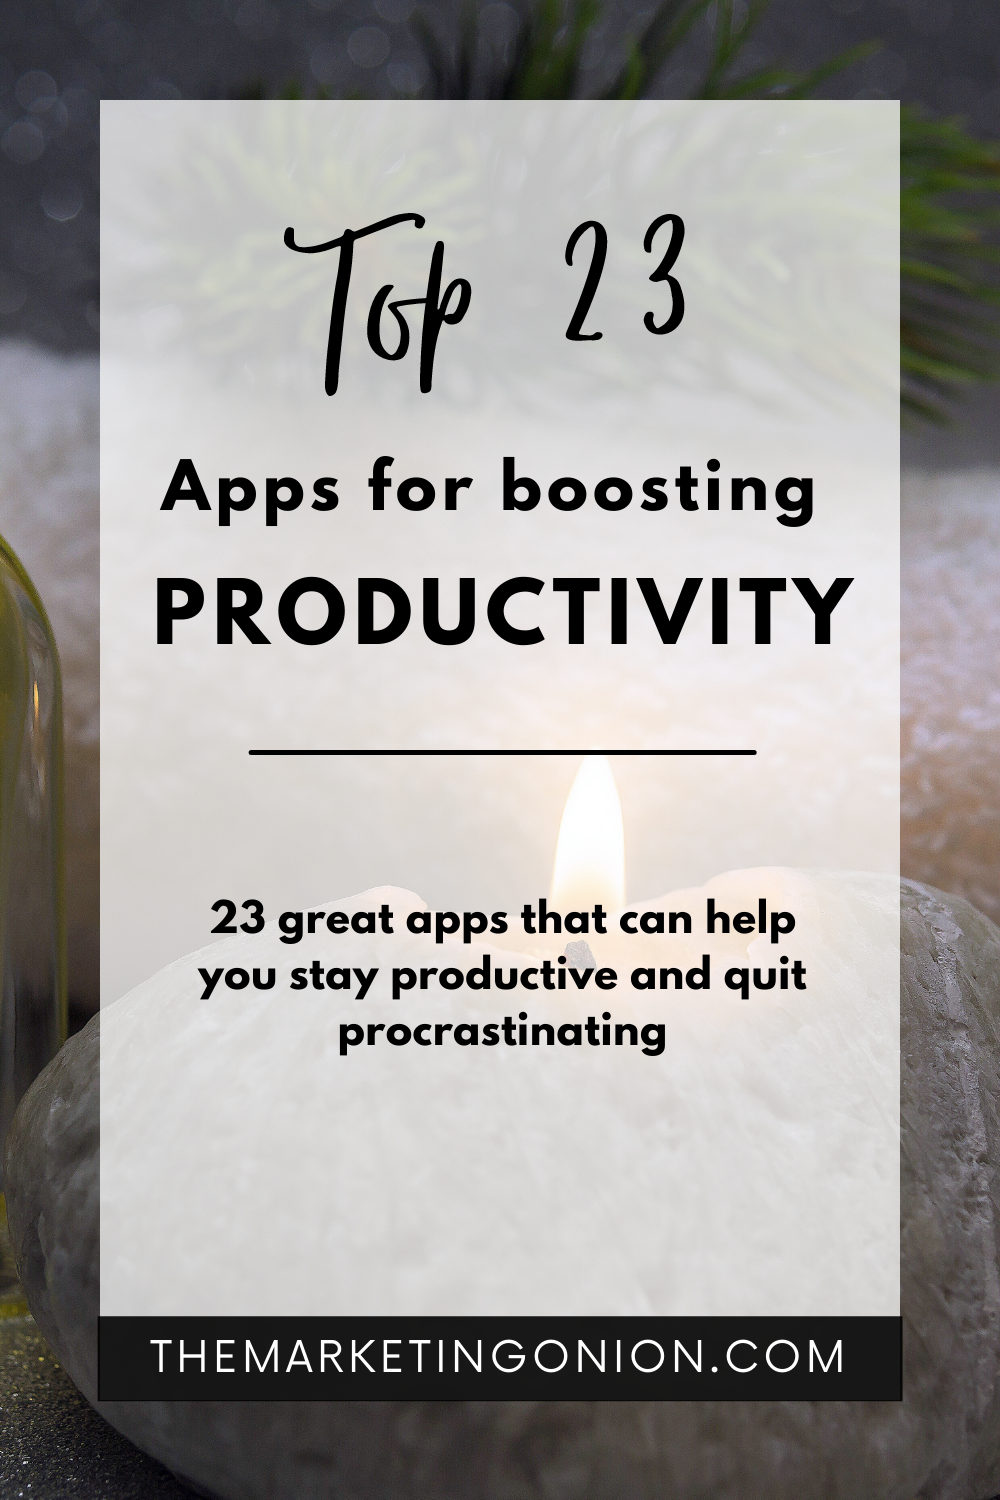 Top 23 apps for boosting productivity